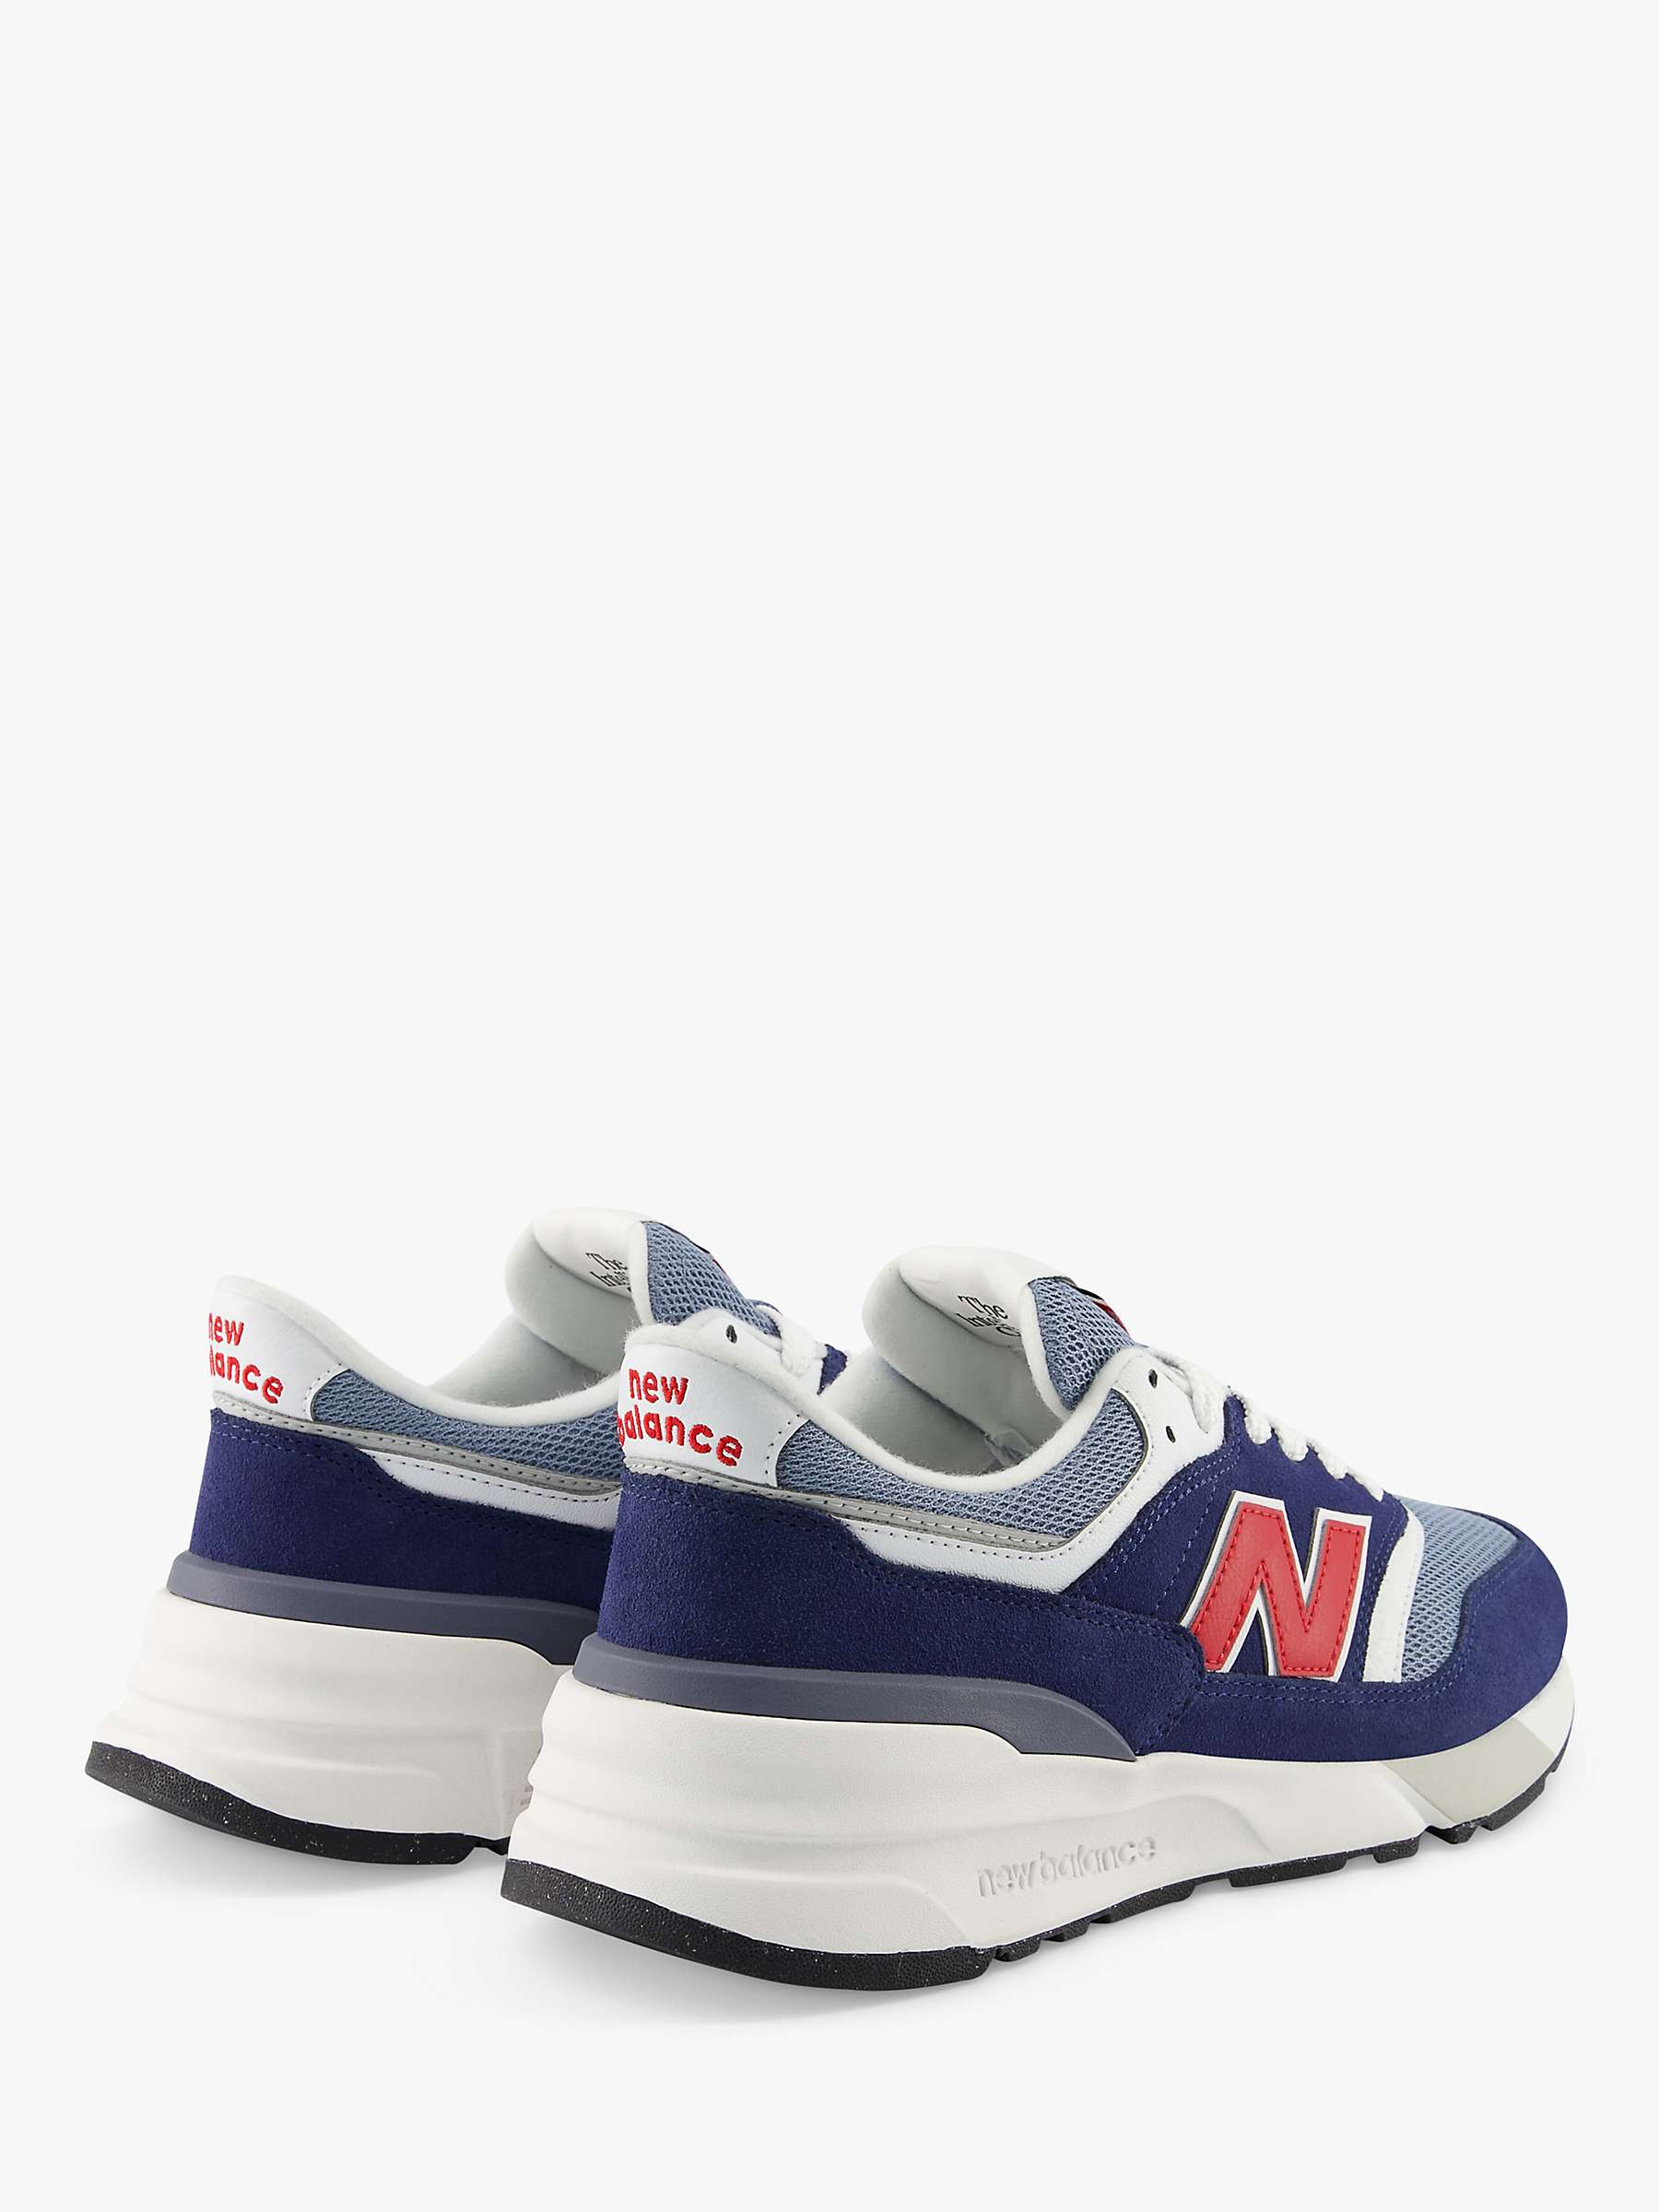 Buy New Balance 997R Suede Mesh Trainers Online at johnlewis.com